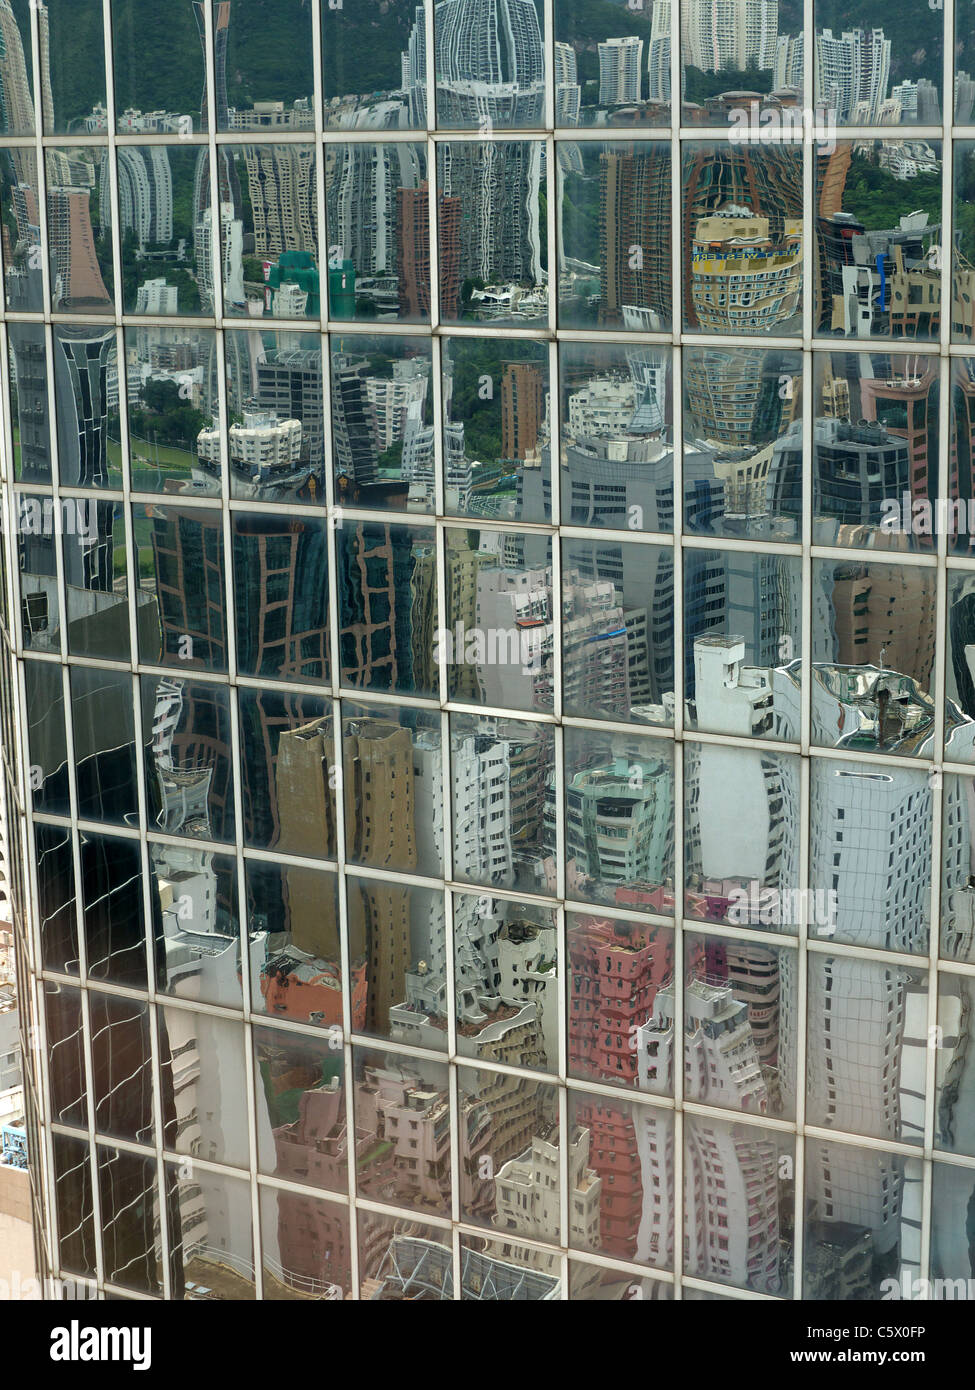 View looking down on Hong Kong appartment blocks reflected in the glass windows of a tower block Stock Photo